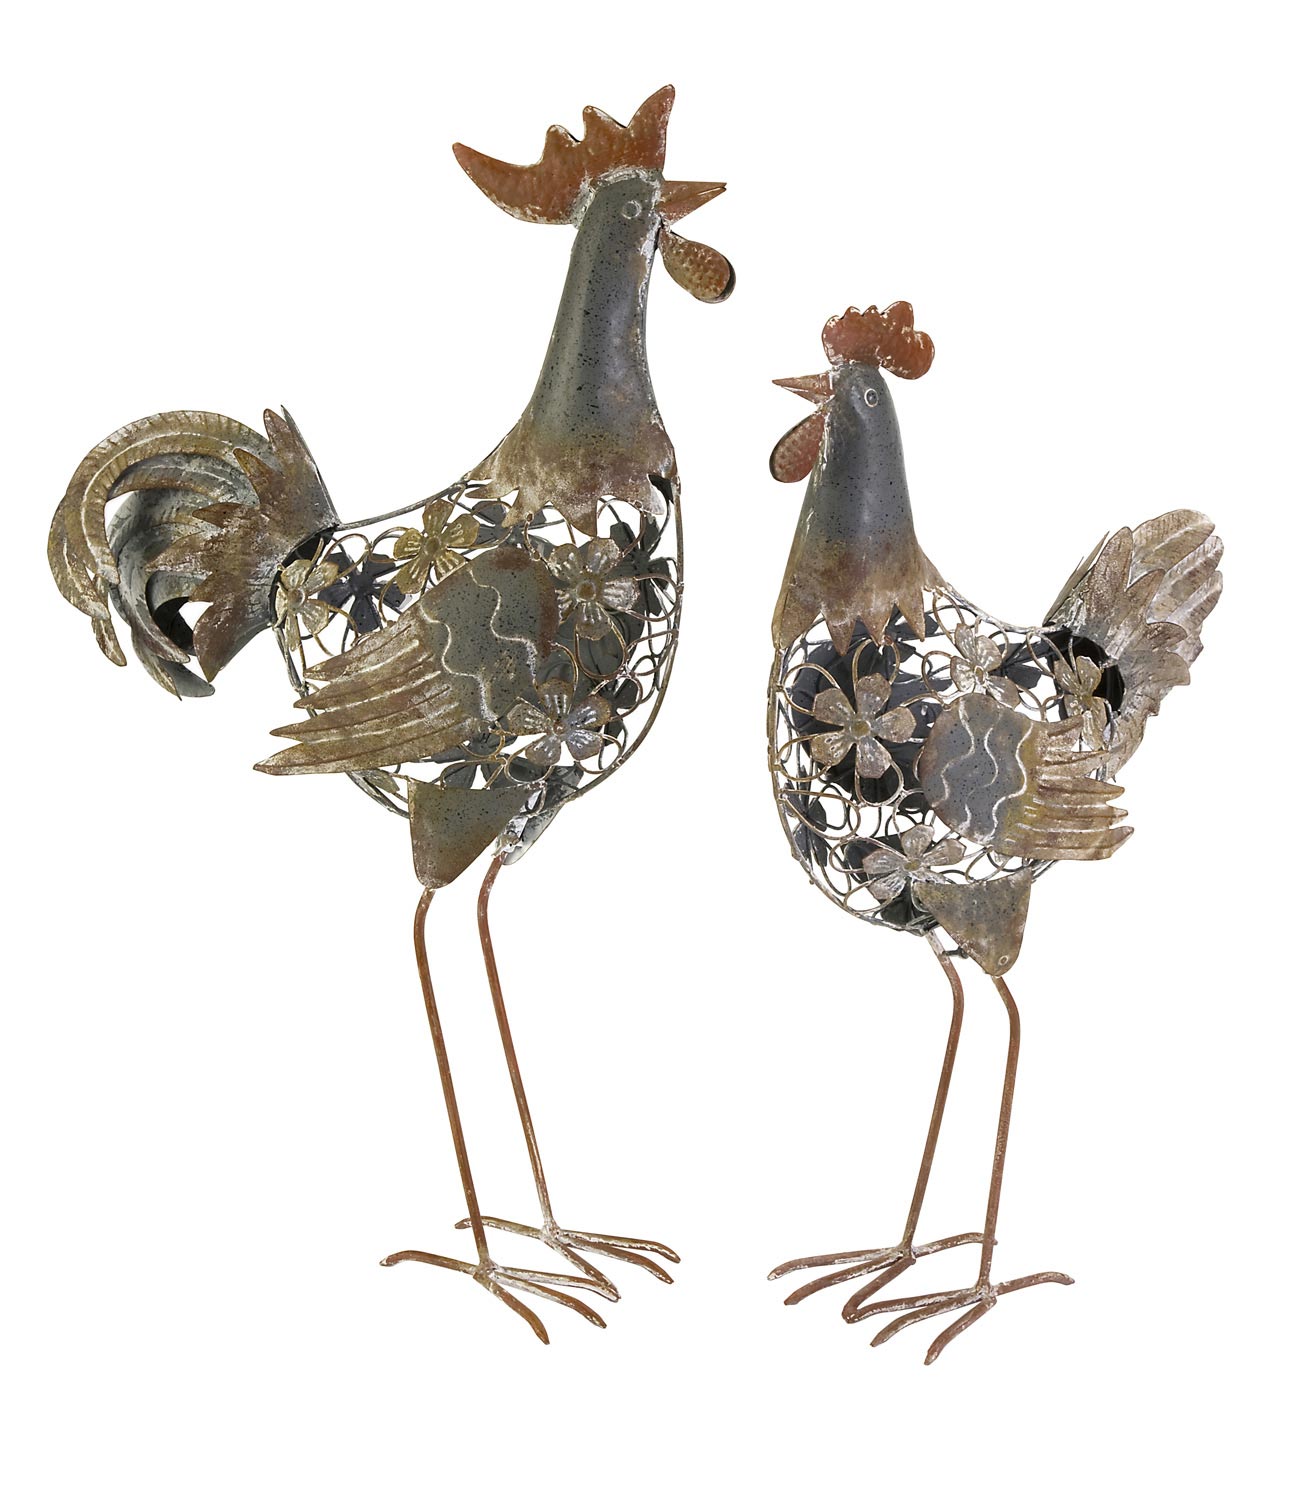 IMAX Hinslow Metal Hen and Rooster - Set of 2